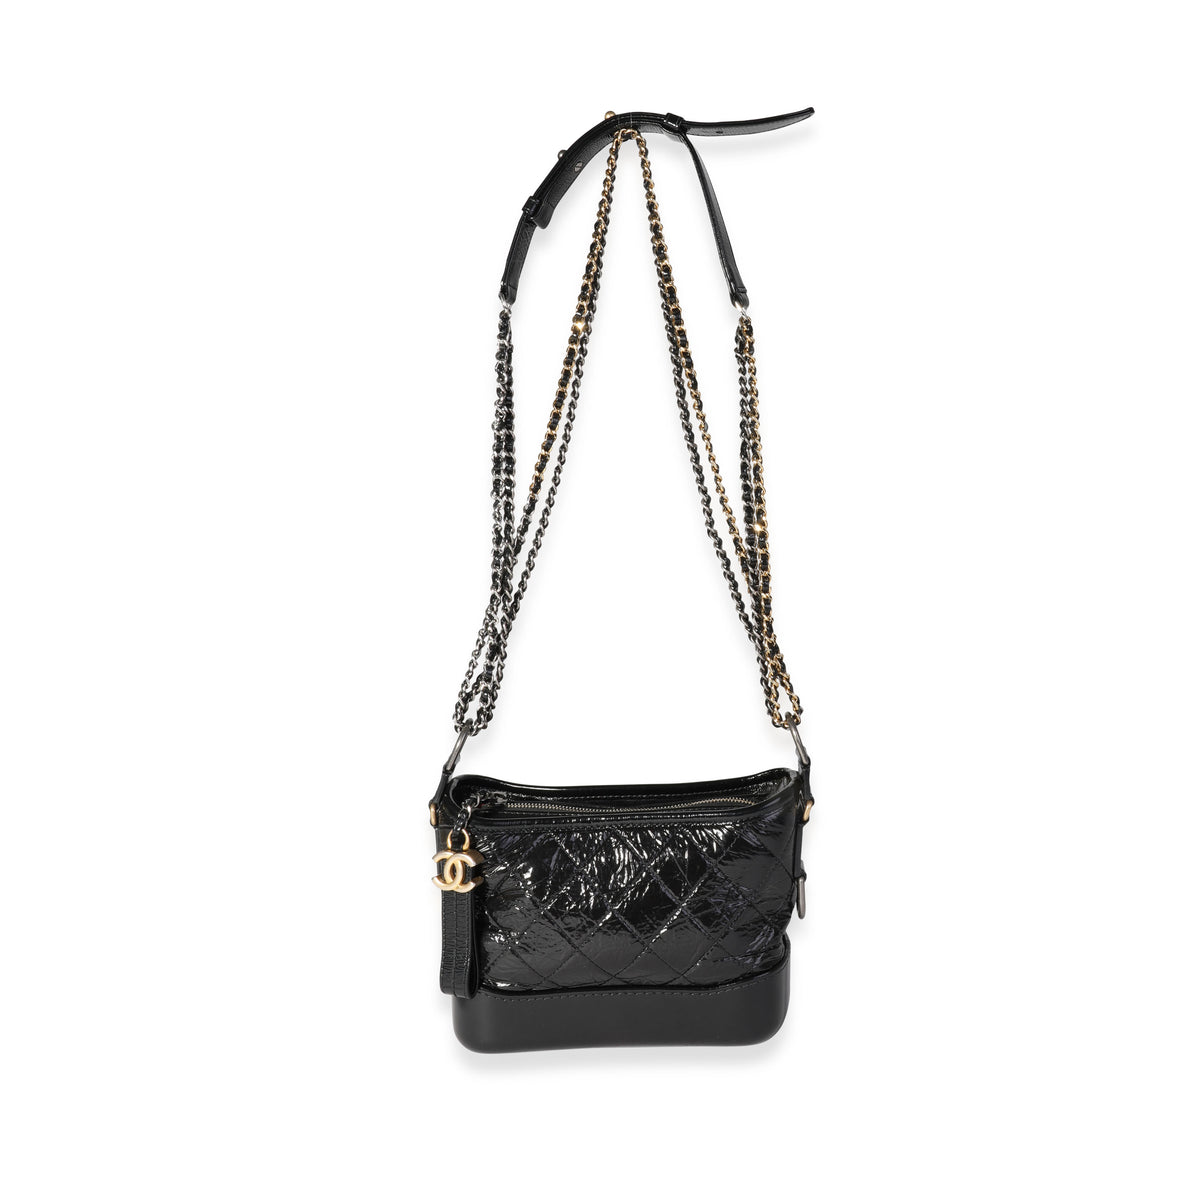 Chanel Black Aged Patent Calfskin Small Gabrielle Hobo